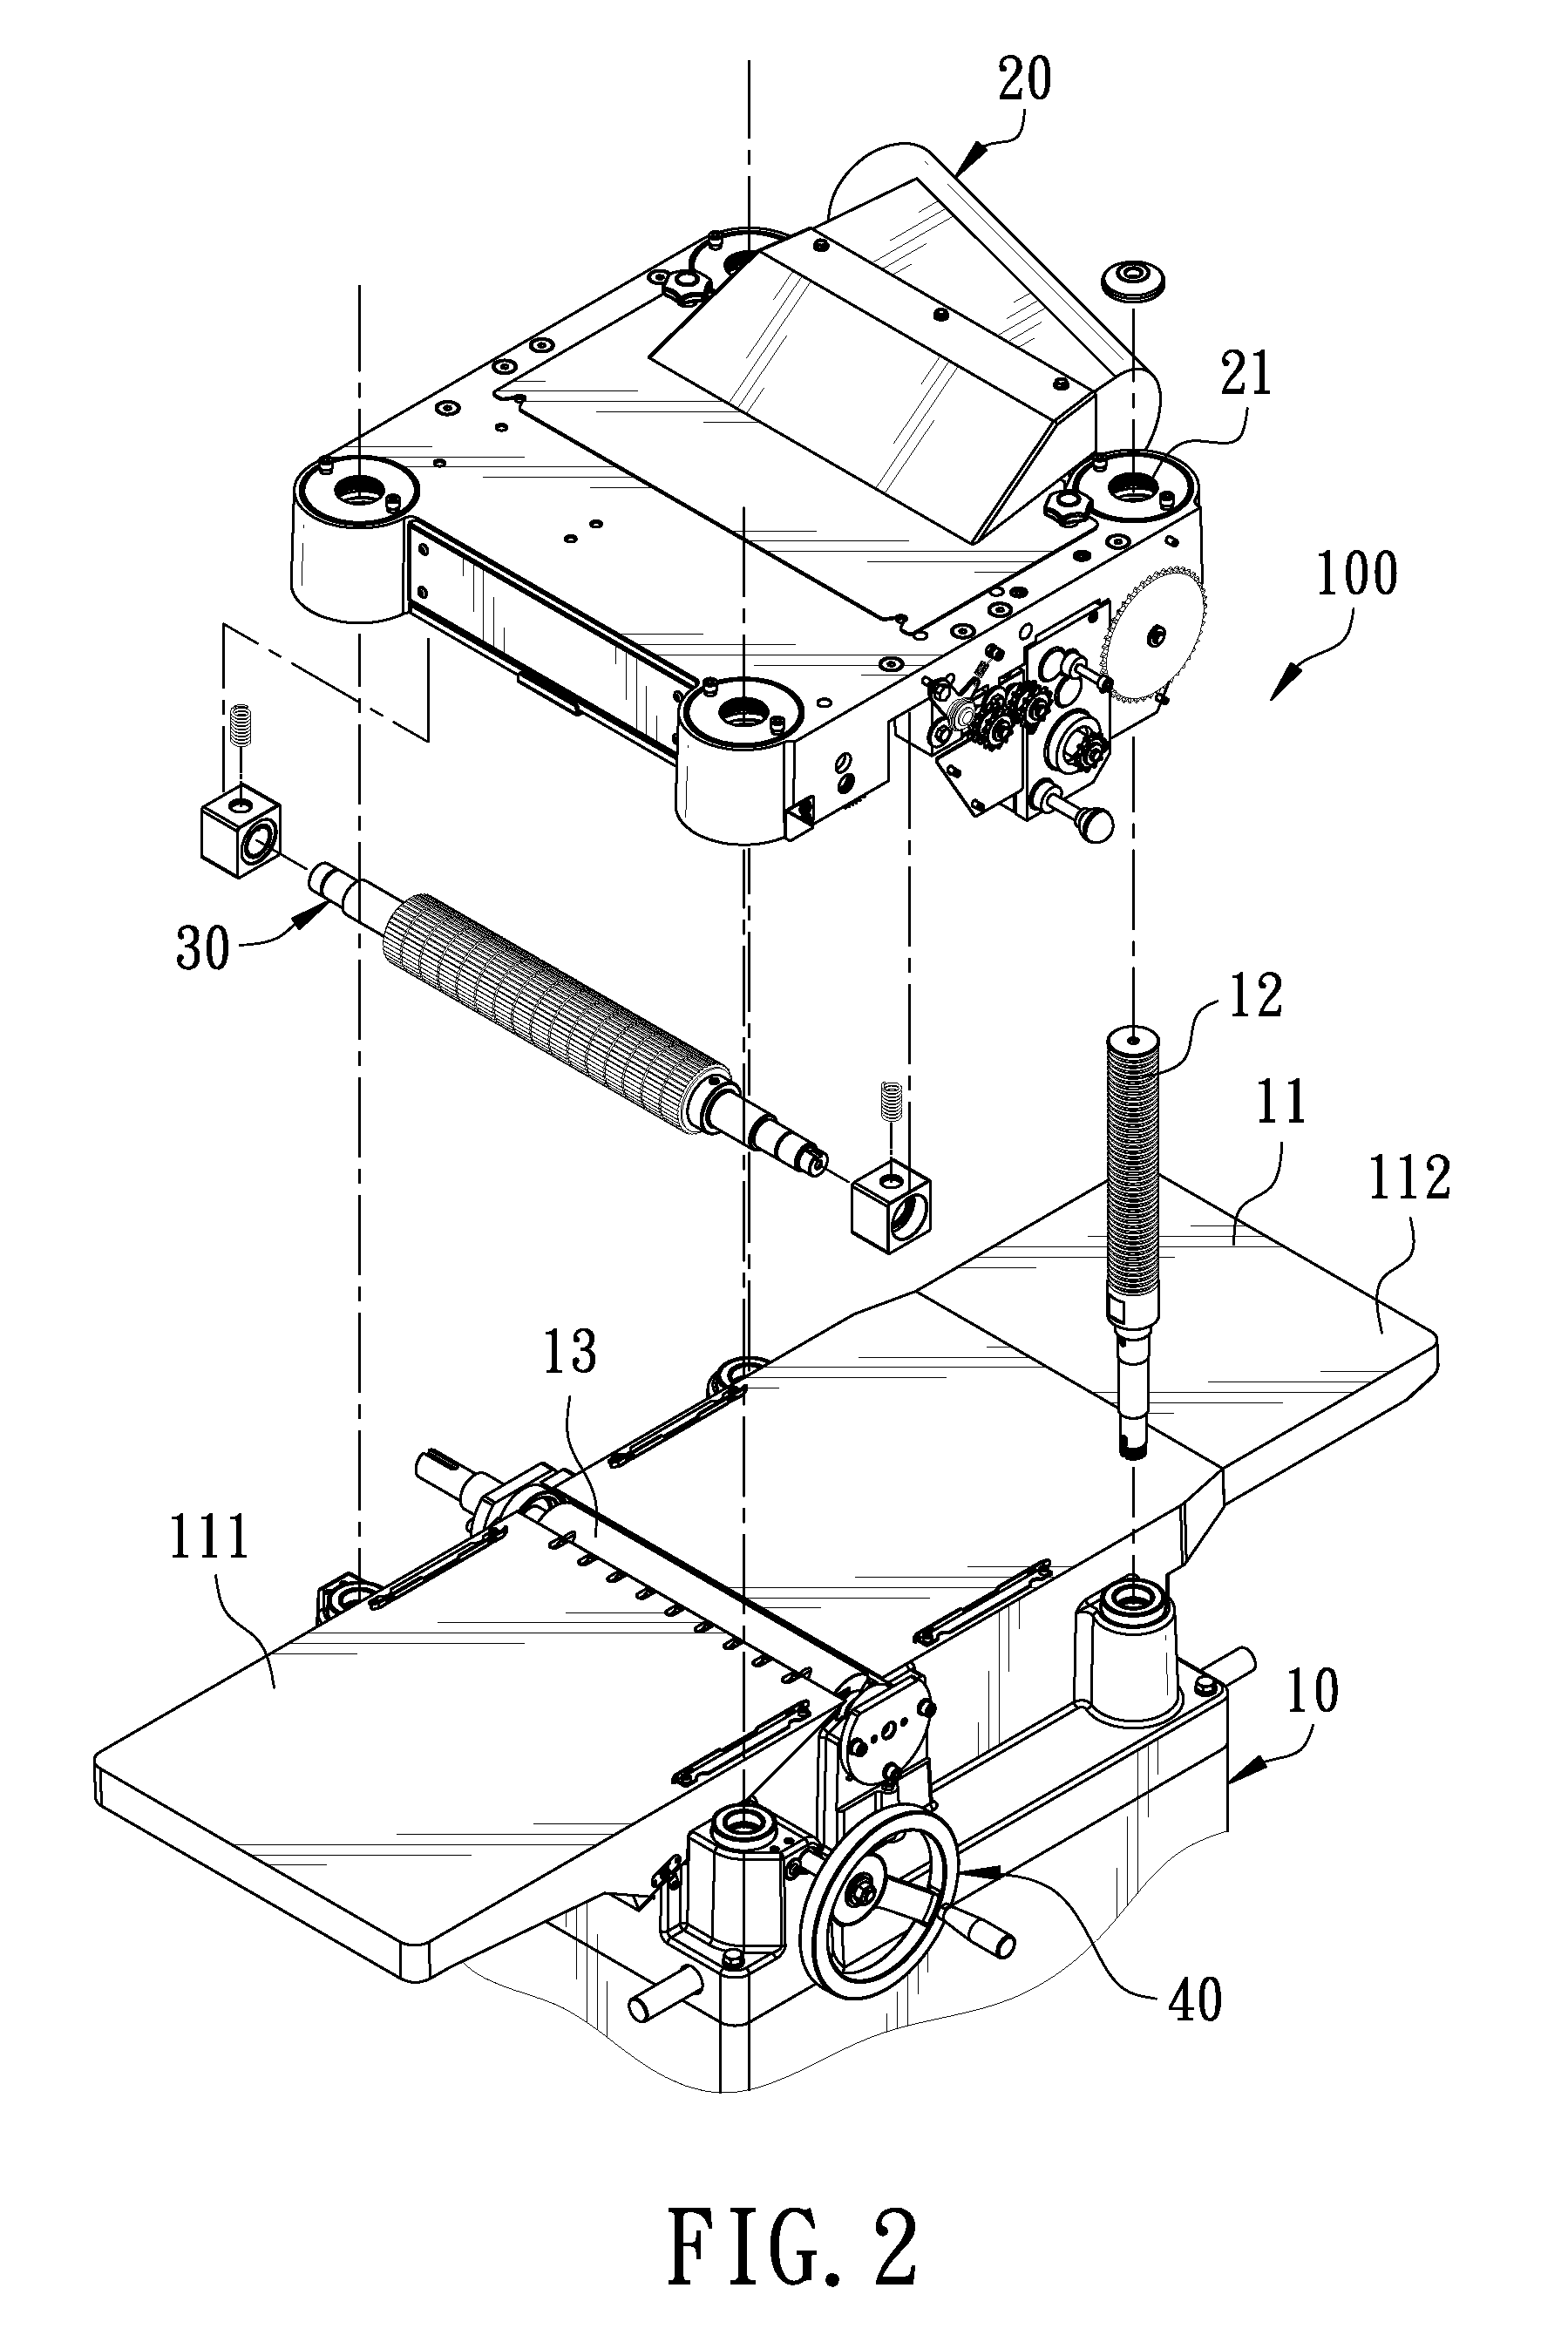 Two-sided planer